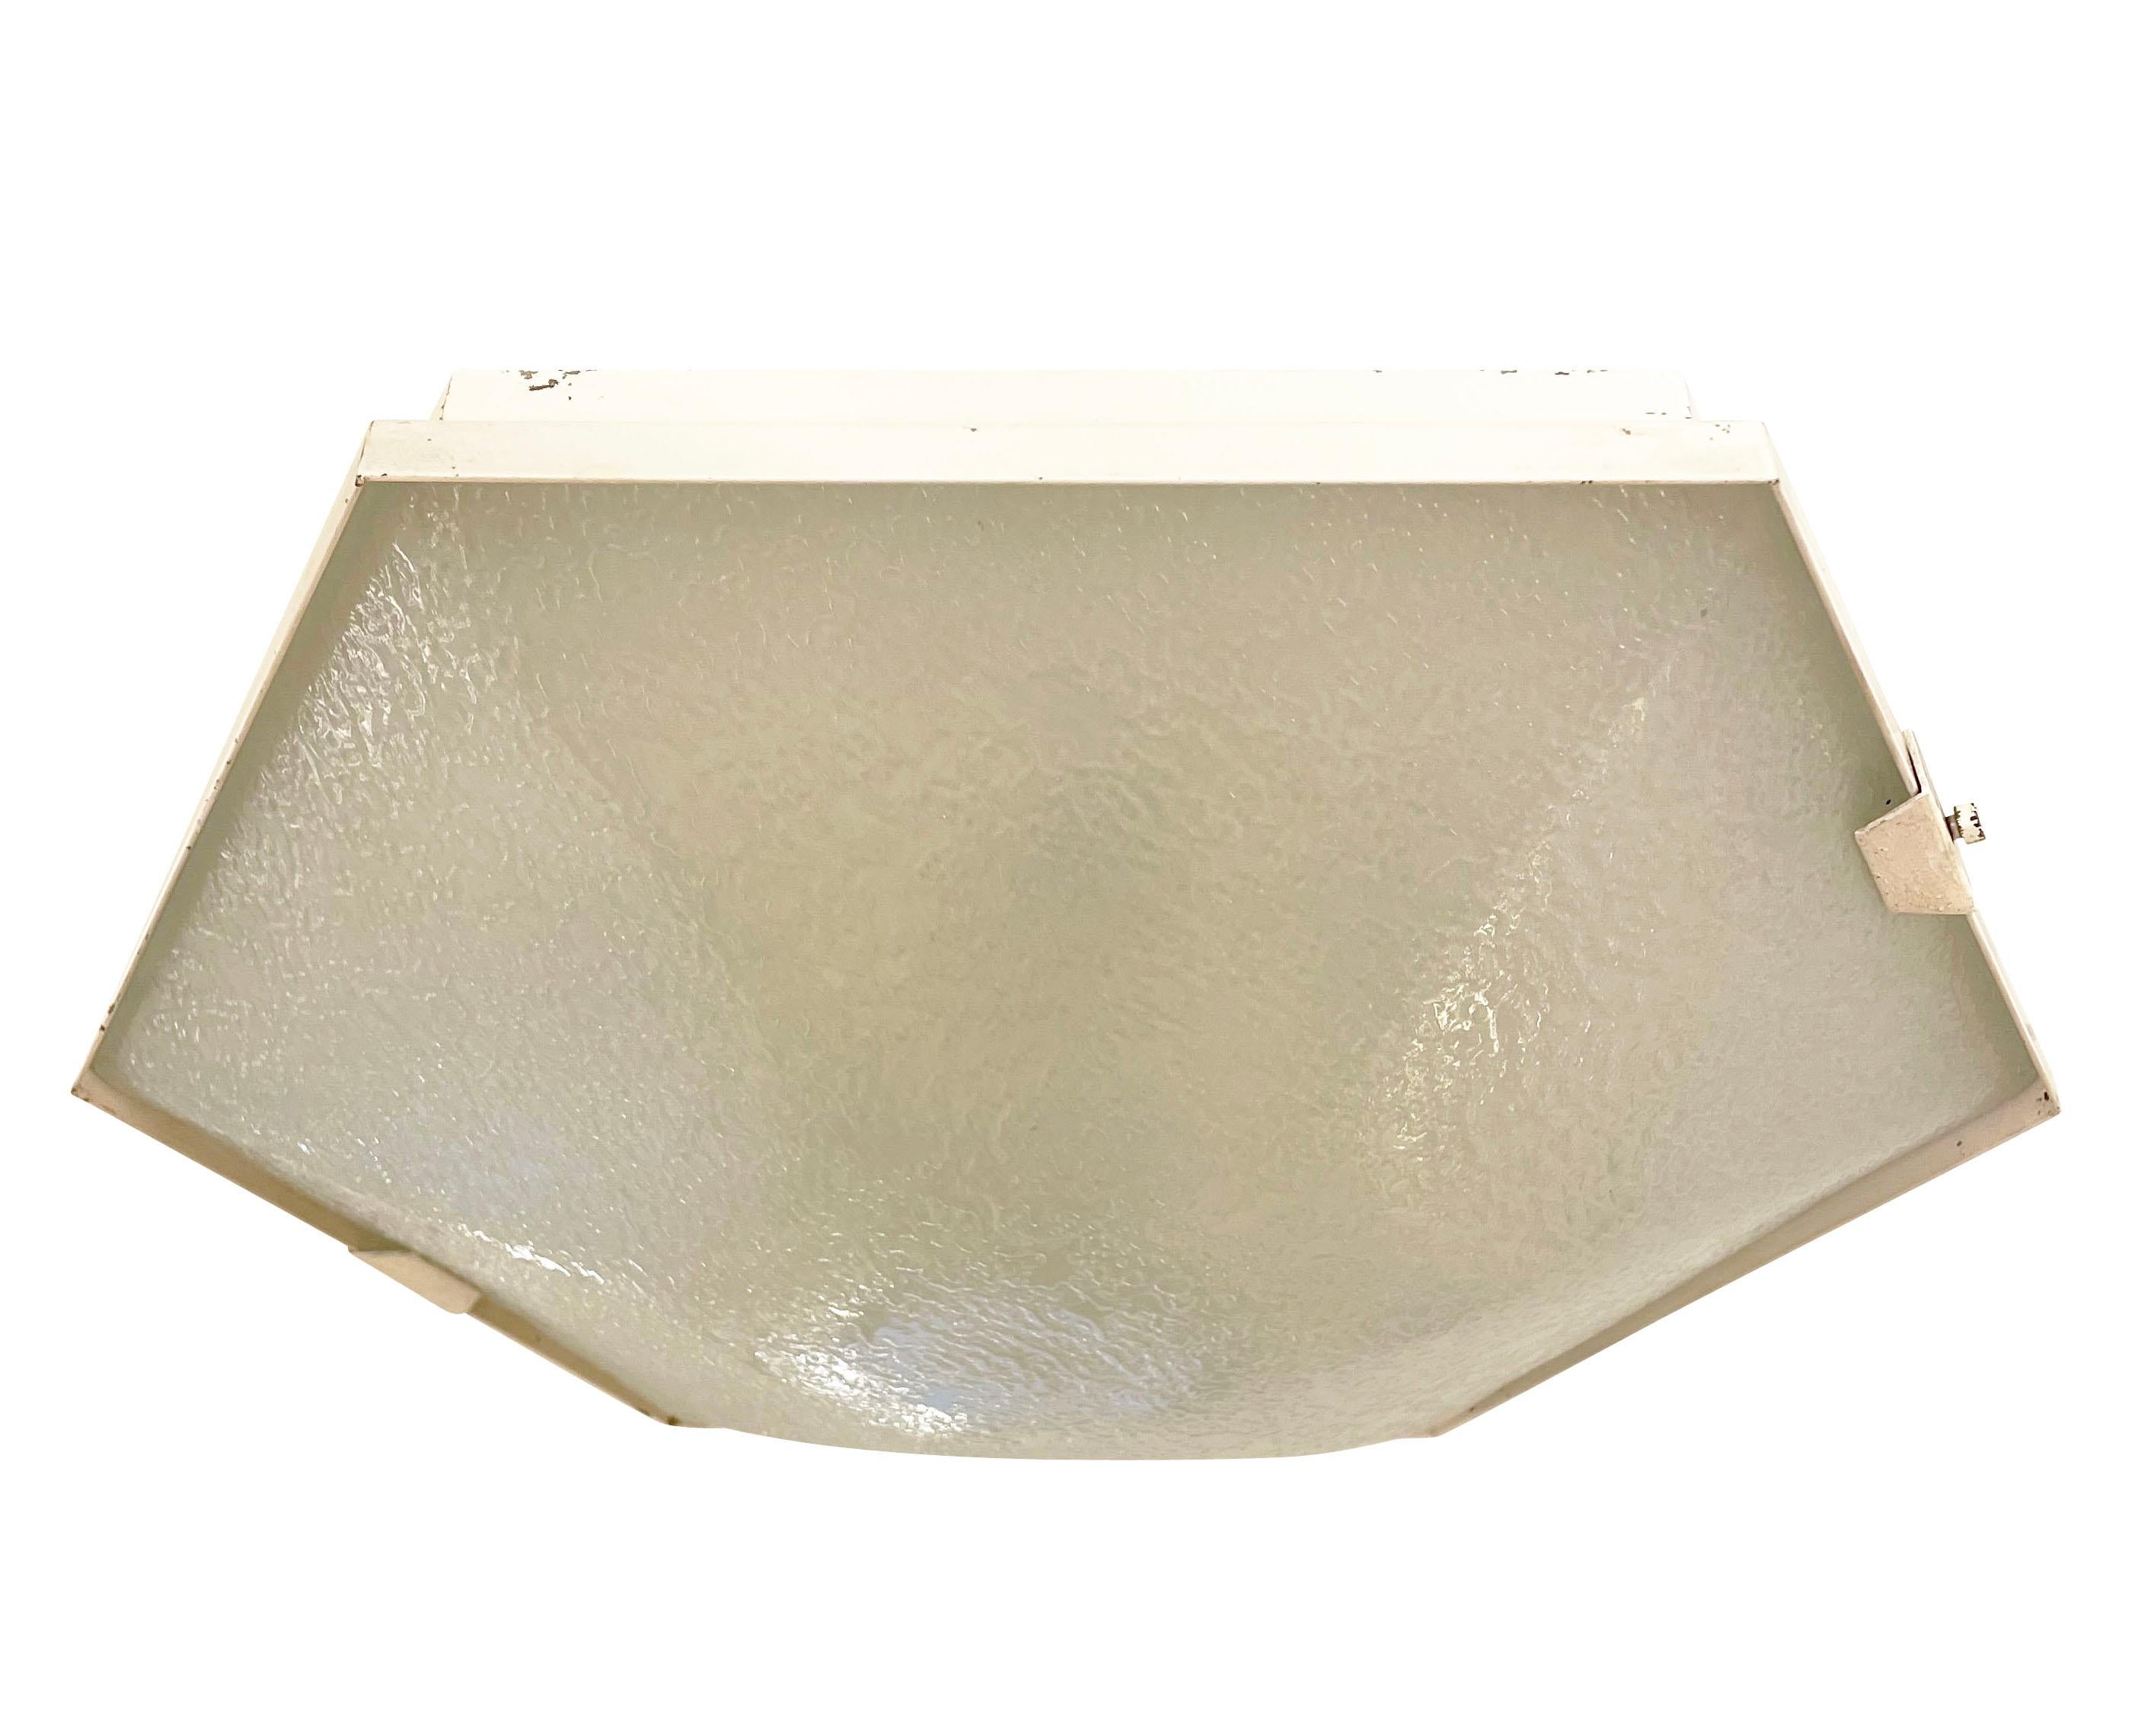 Hexagonal Stilnovo light which can be used as a flush mount or sconce. Beautifully molded textured glass with white framing. Holds six candelabra bulbs.

Condition: Excellent vintage condition, minor wear consistent with age and use 

Measures: